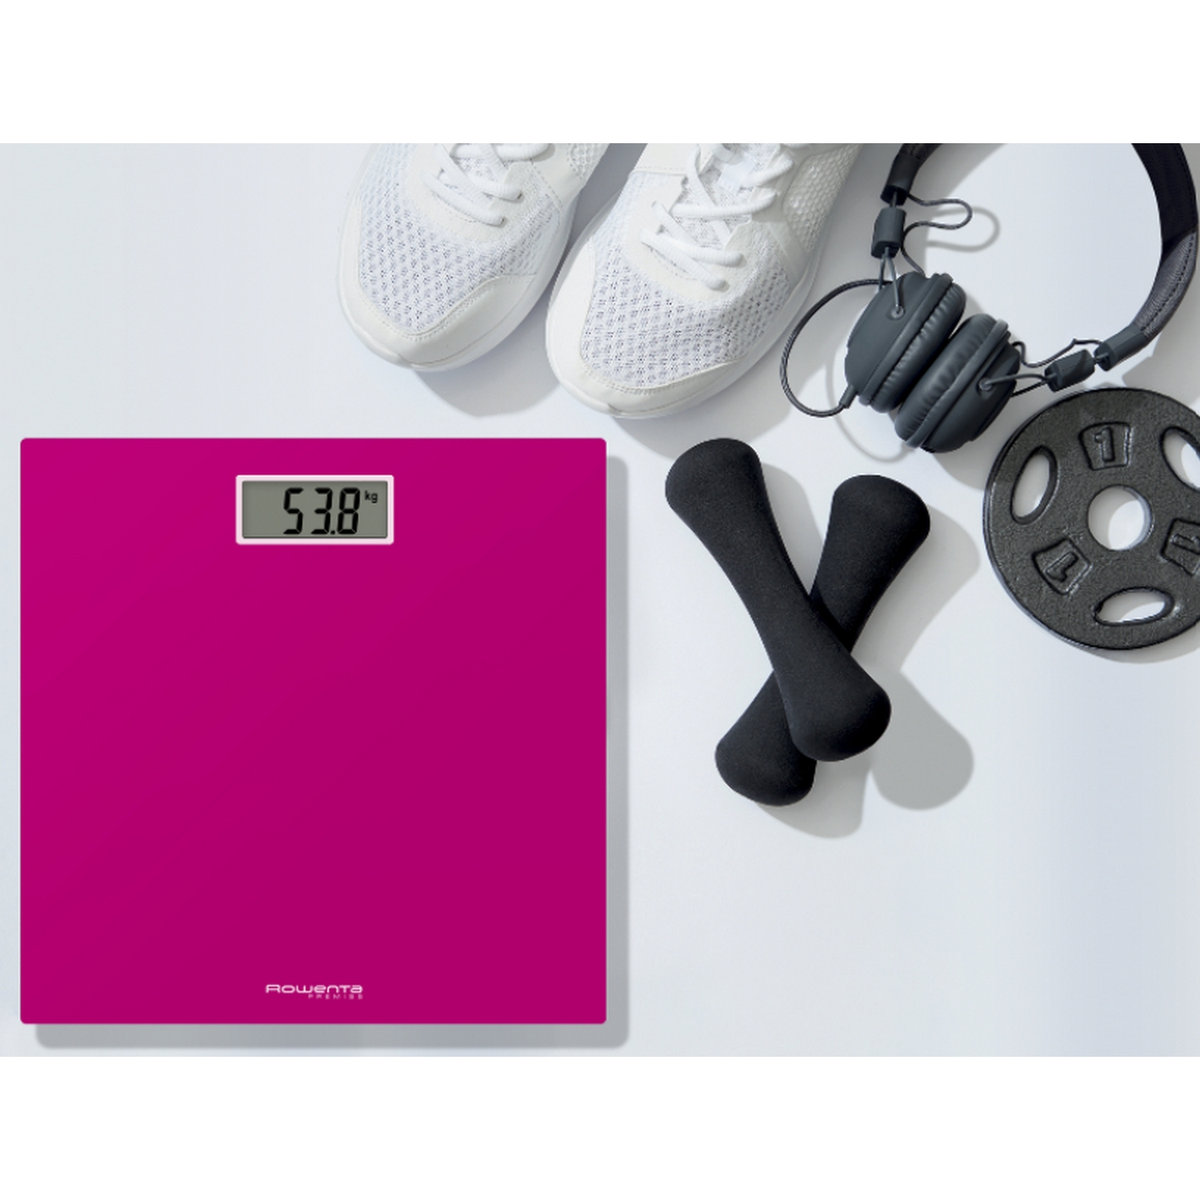 BS1403 ROWENTA scale Personal